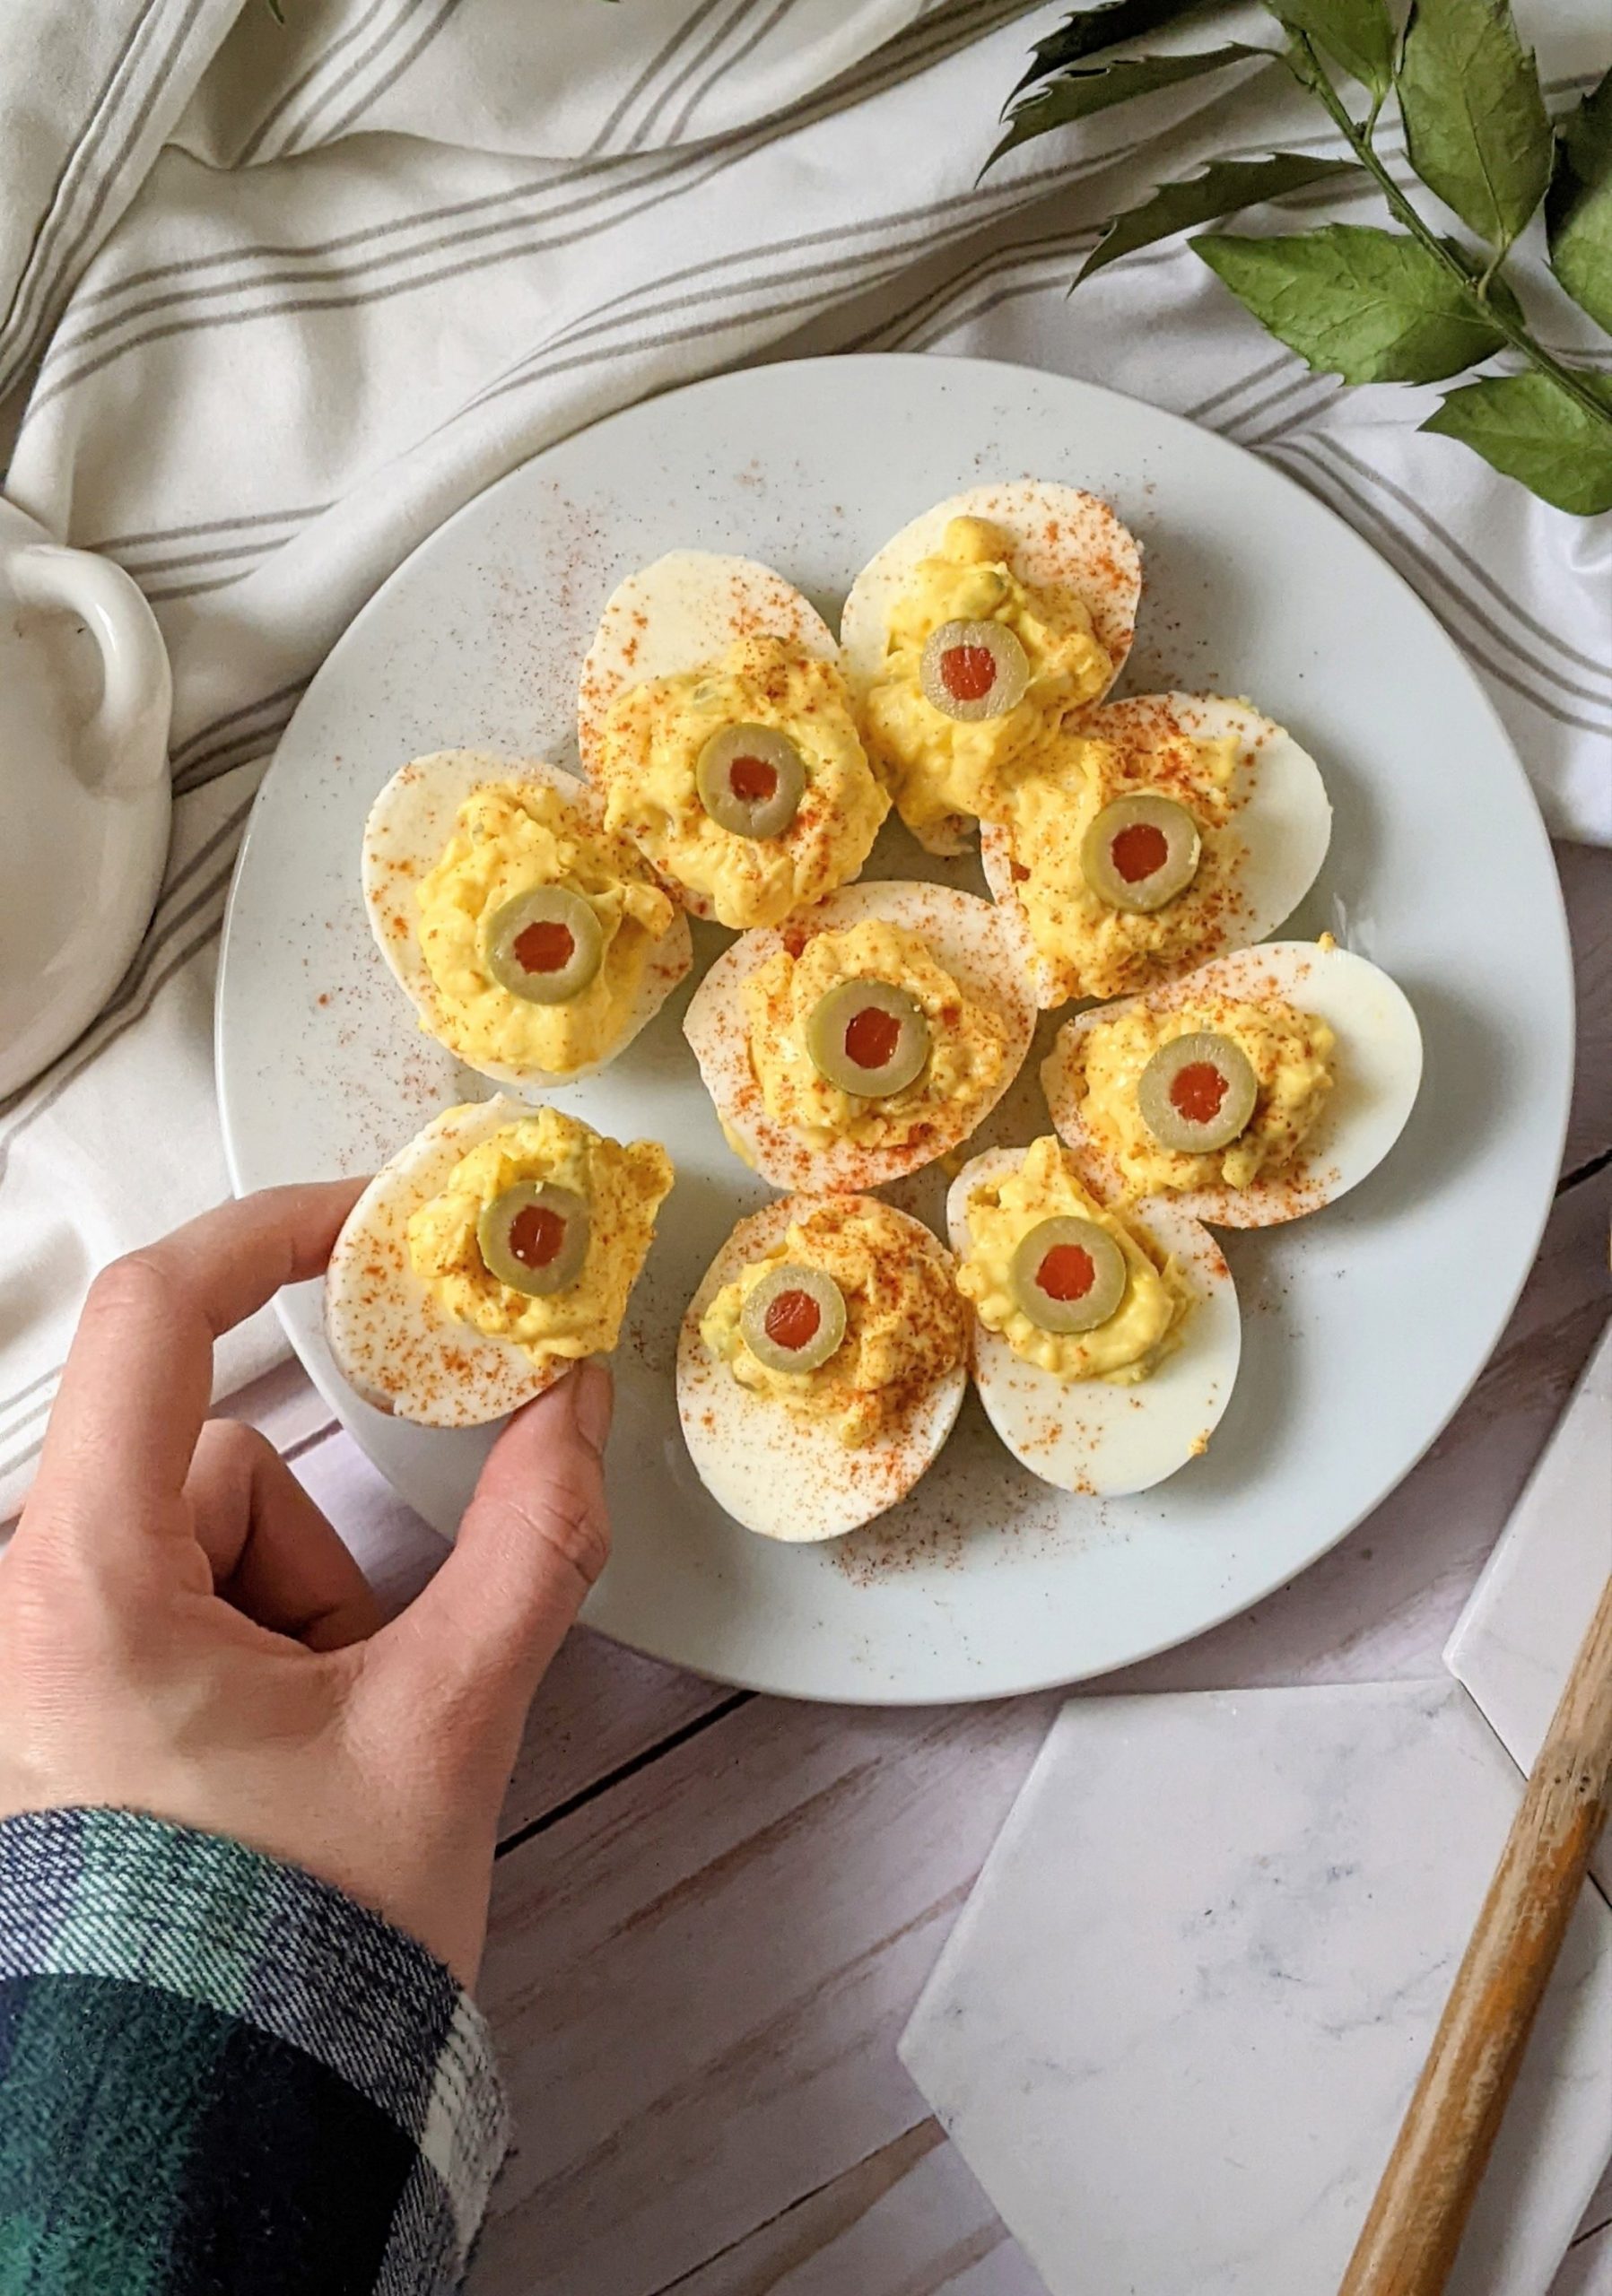 green olive deviled eggs with chopped olives in the filling gluten free high protein appetizers with olives and egg recipes vegetarian party good retro recipes